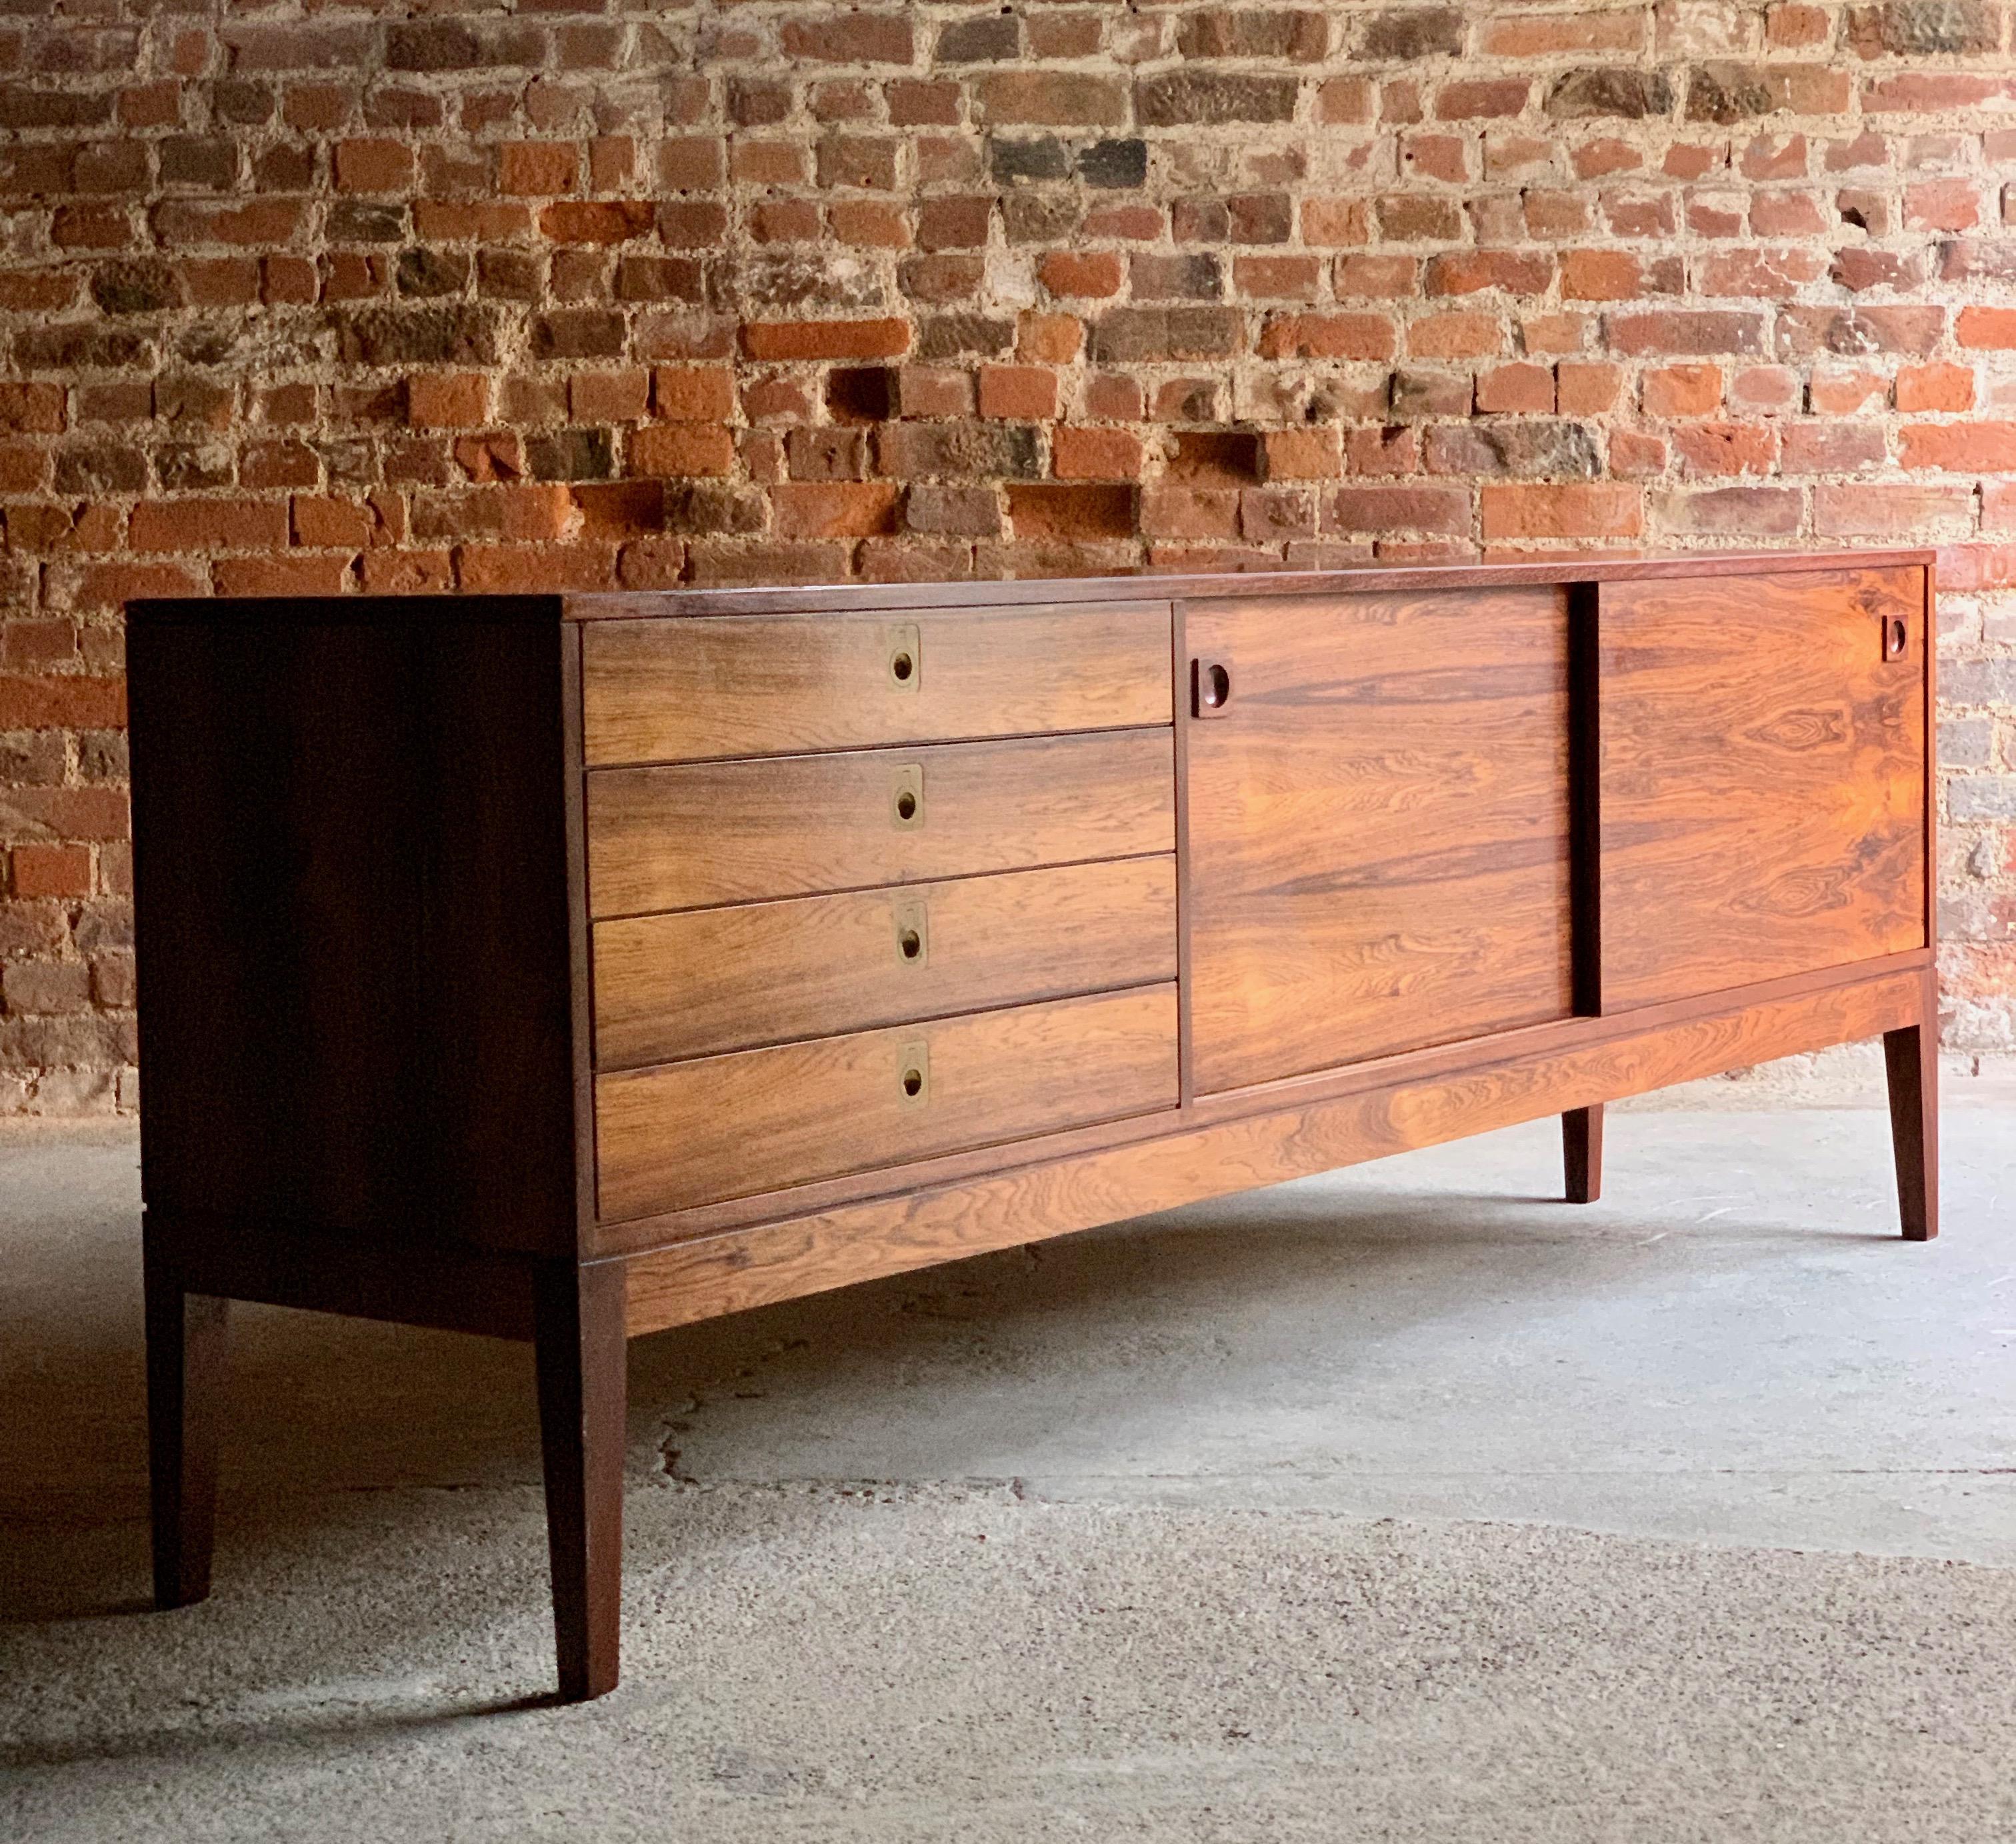 Robert Heritage rosewood sideboard credenza for Archie Shine retailed through Heals, circa 1970

Robert Heritage design for Archie Shine Rosewood sideboard credenza retailed through Heals, circa 1970, The rectangular top over four drawers to the